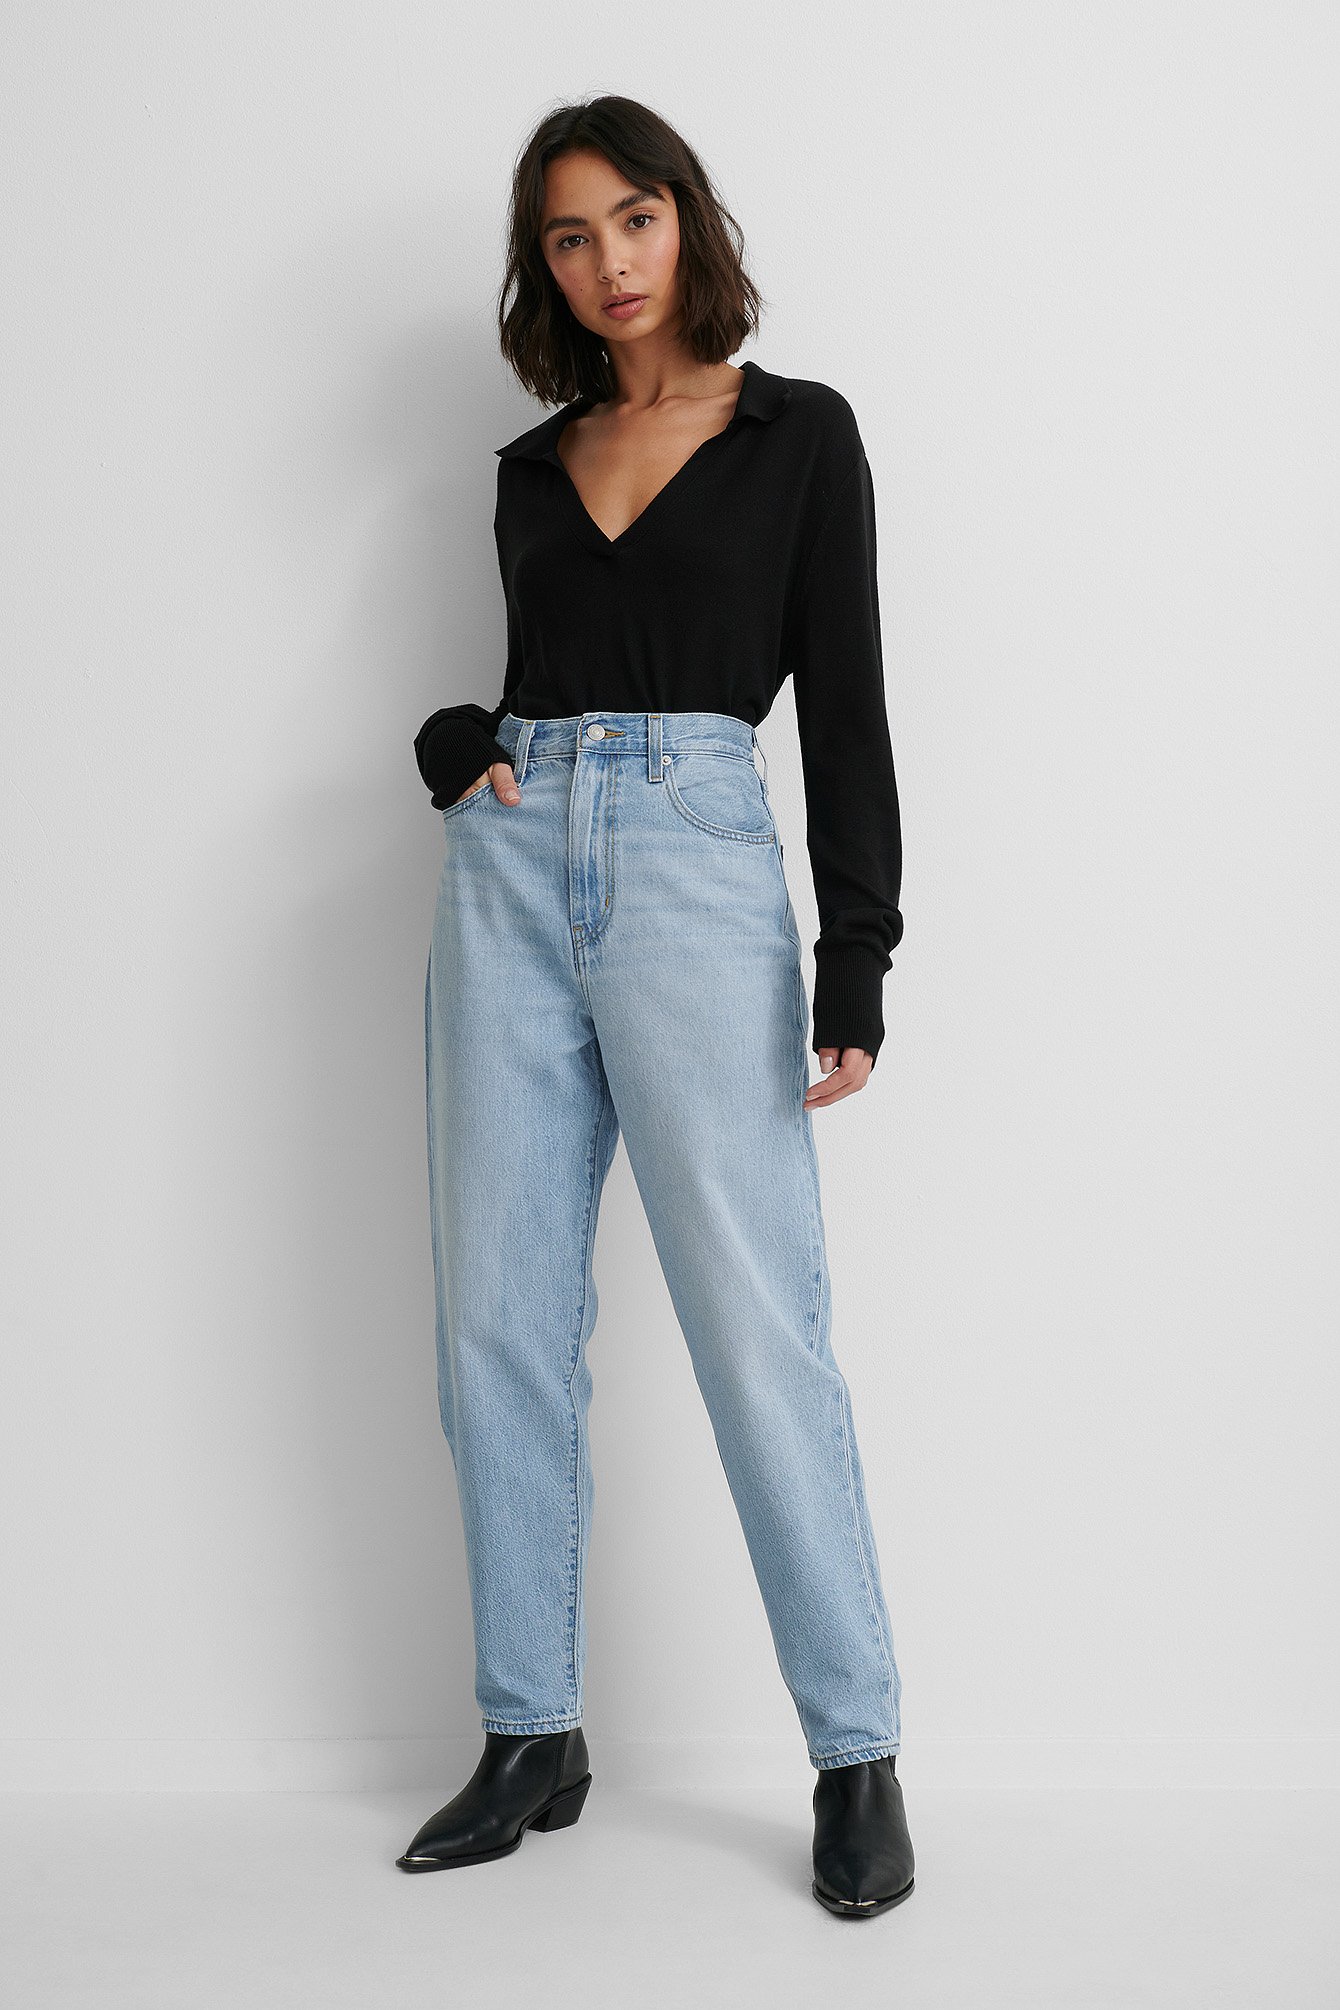 Levis High Loose Taper Jeans Near Sighted with Black Top.